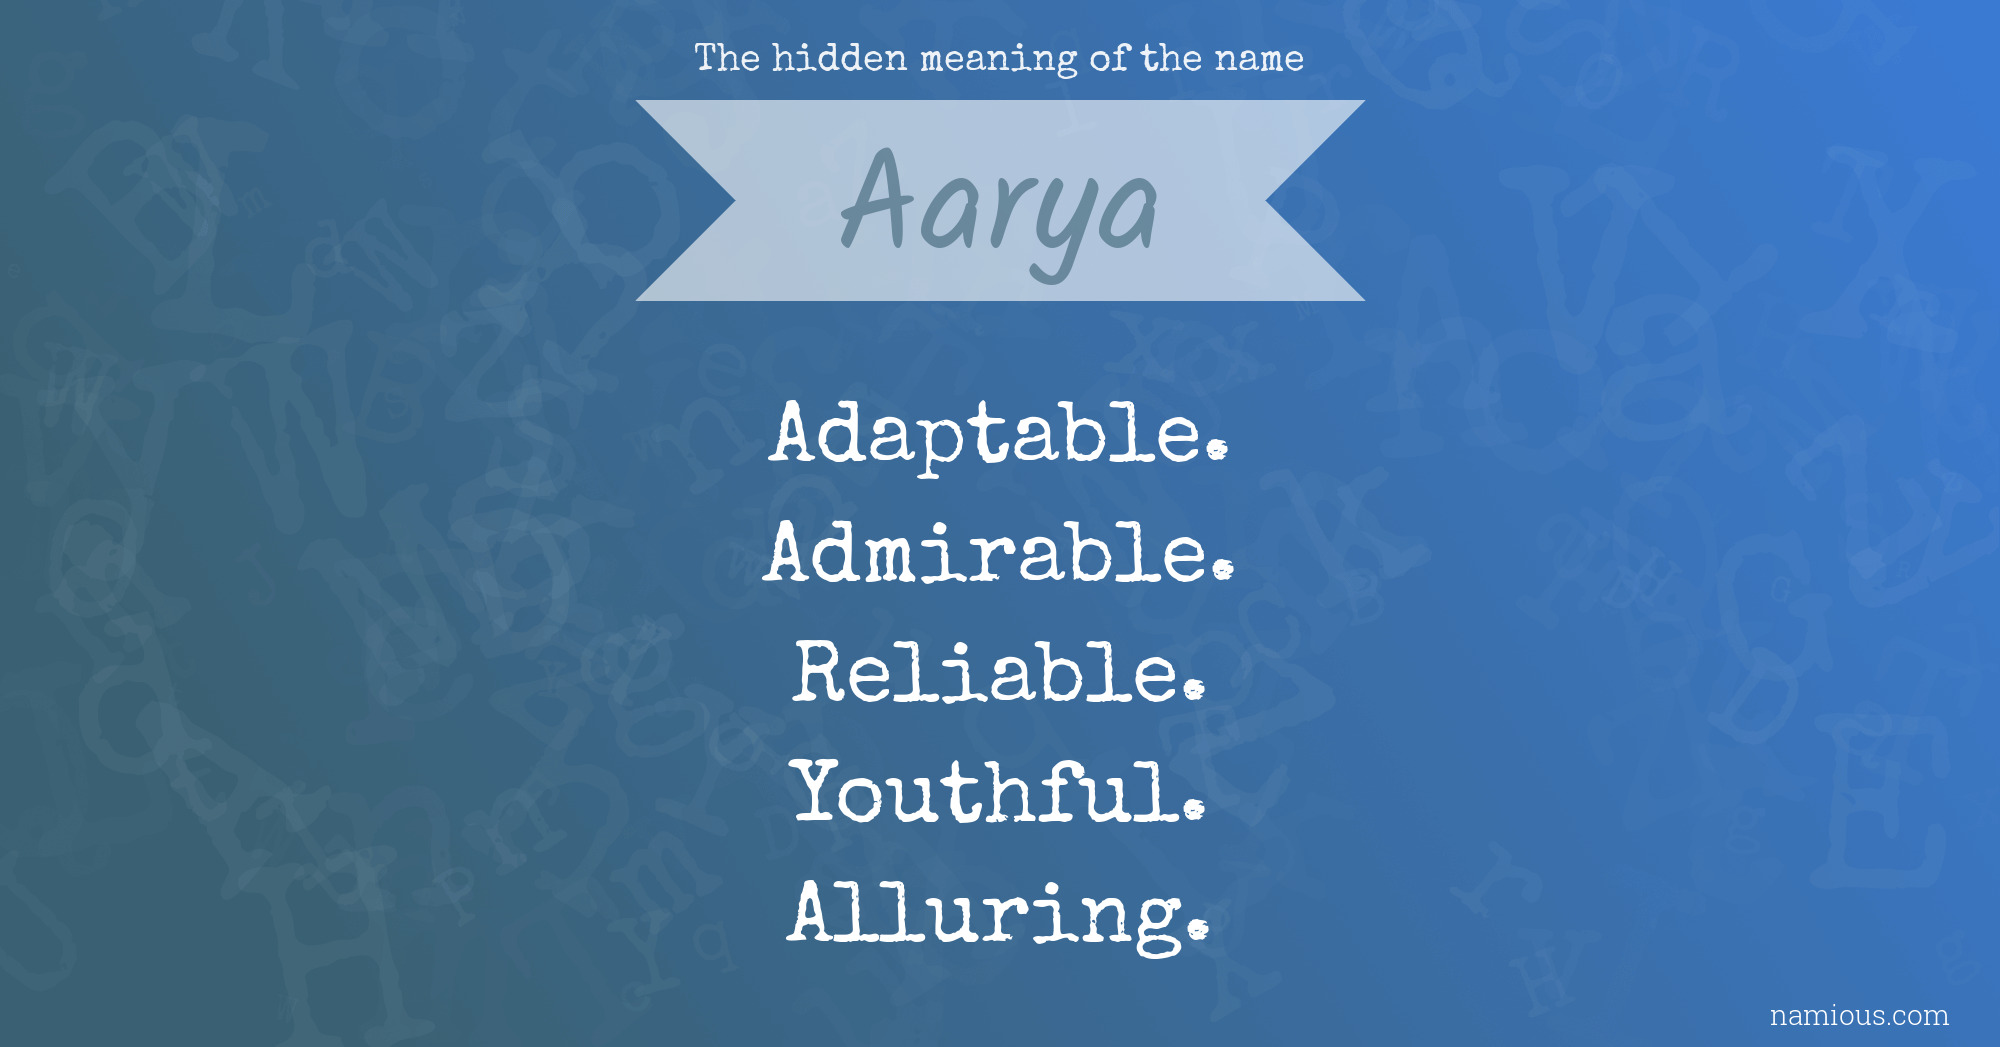 The hidden meaning of the name Aarya